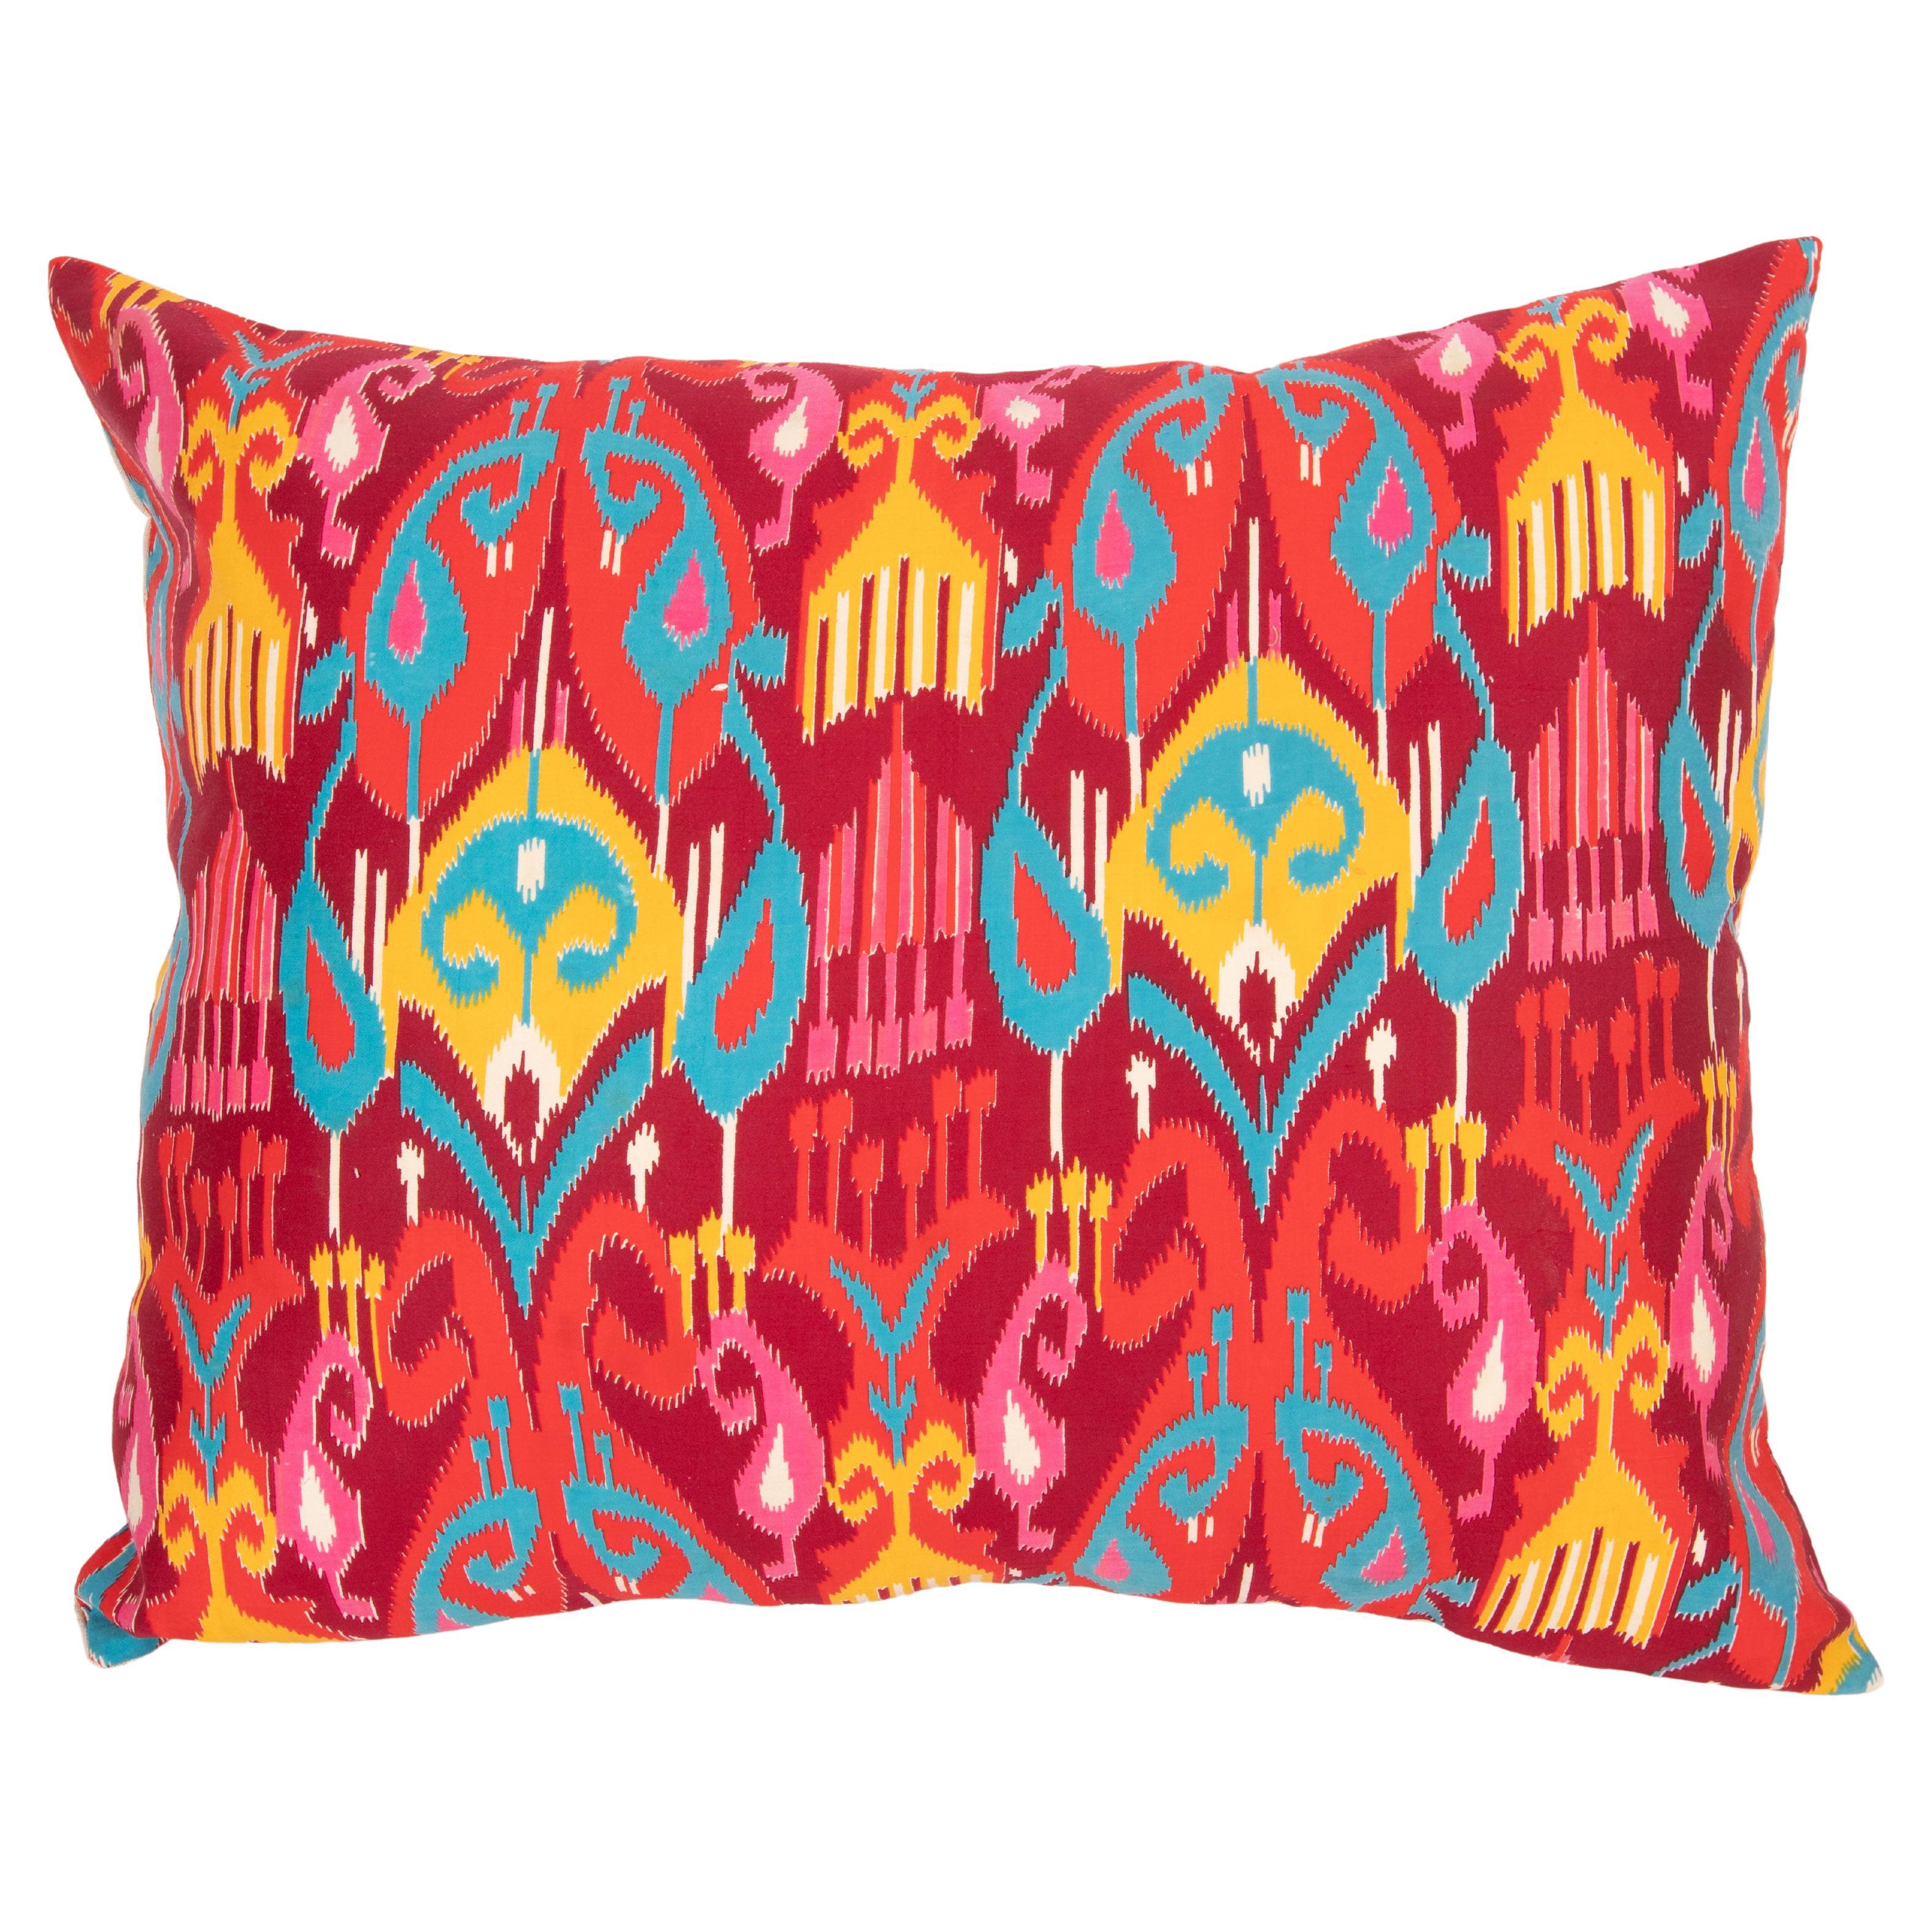 Russian Roller Printed Pillow Covers, Mid 20th C